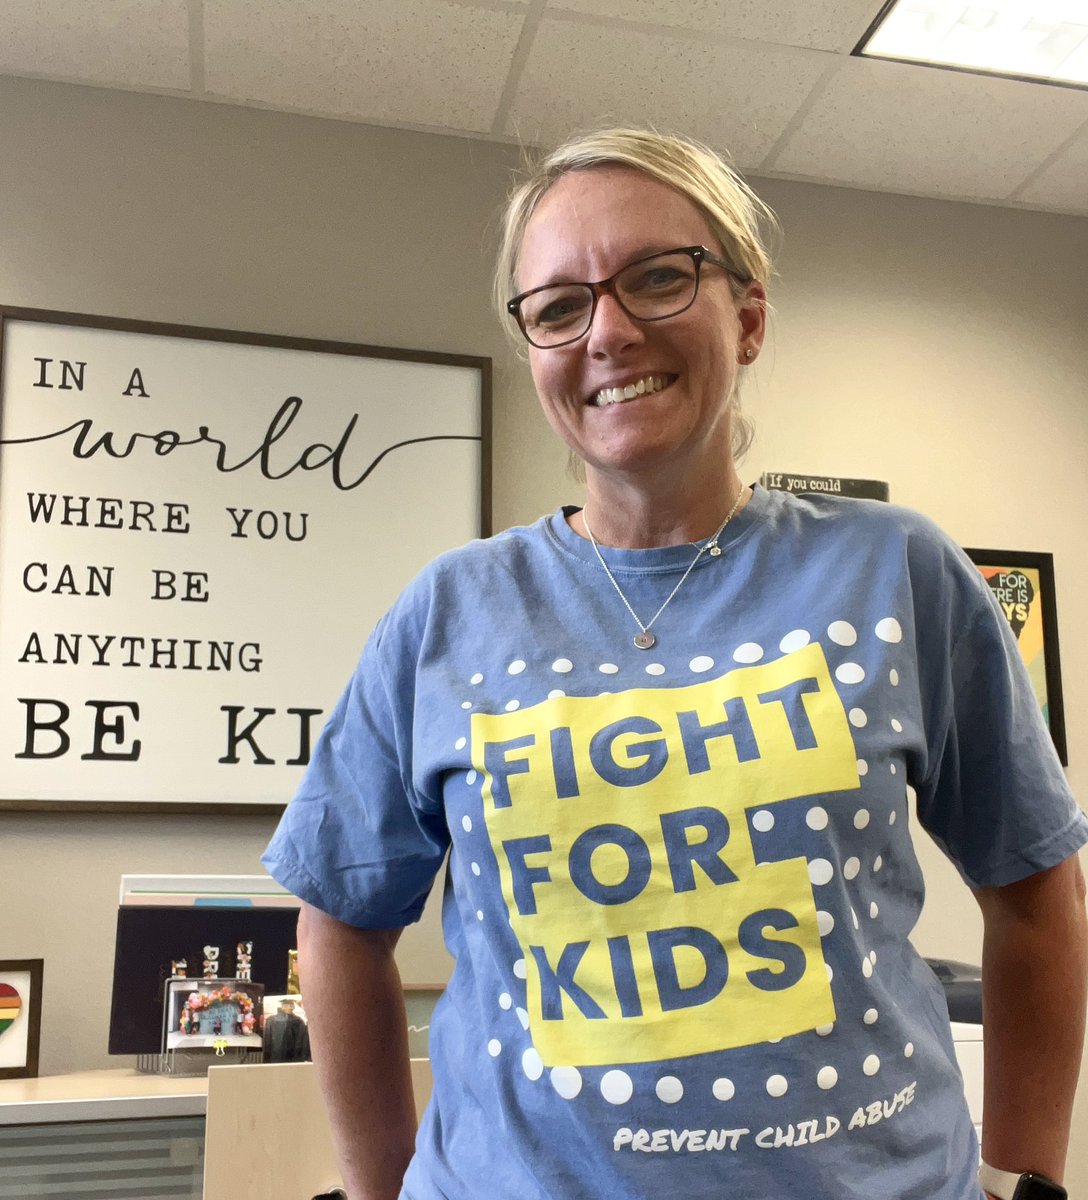 Today is @PCAAmerica #WearBlueDay and I’m partnering with @HeyWadeKing and @GetYourTeachOn to raise awareness and stand in solidarity with child abuse prevention efforts. 

According to the CDC, an estimated 1 in 7 children have experienced abuse or neglect in the United States